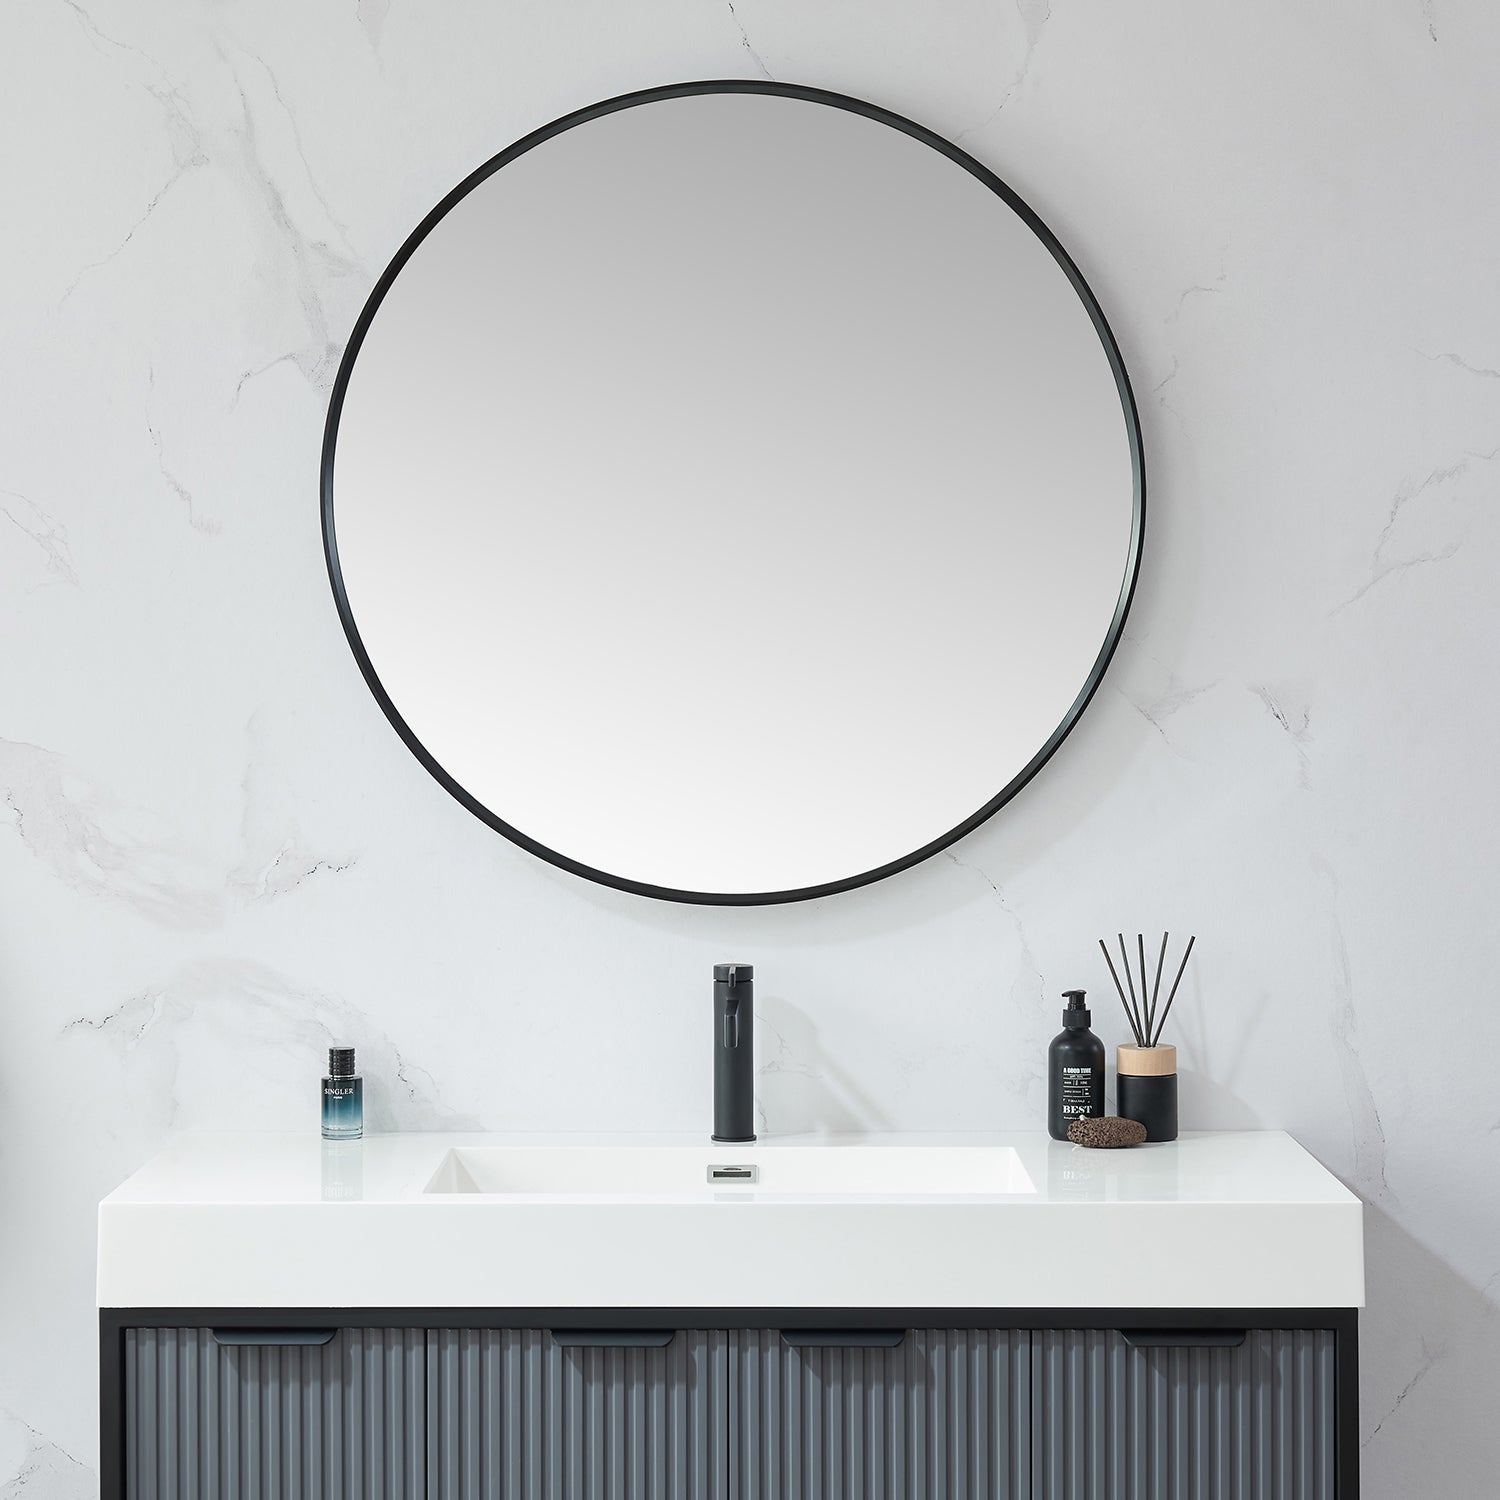 Cascante 35.4 in. W x 35.4 in. H Round Metal Wall Mirror in Brushed Black